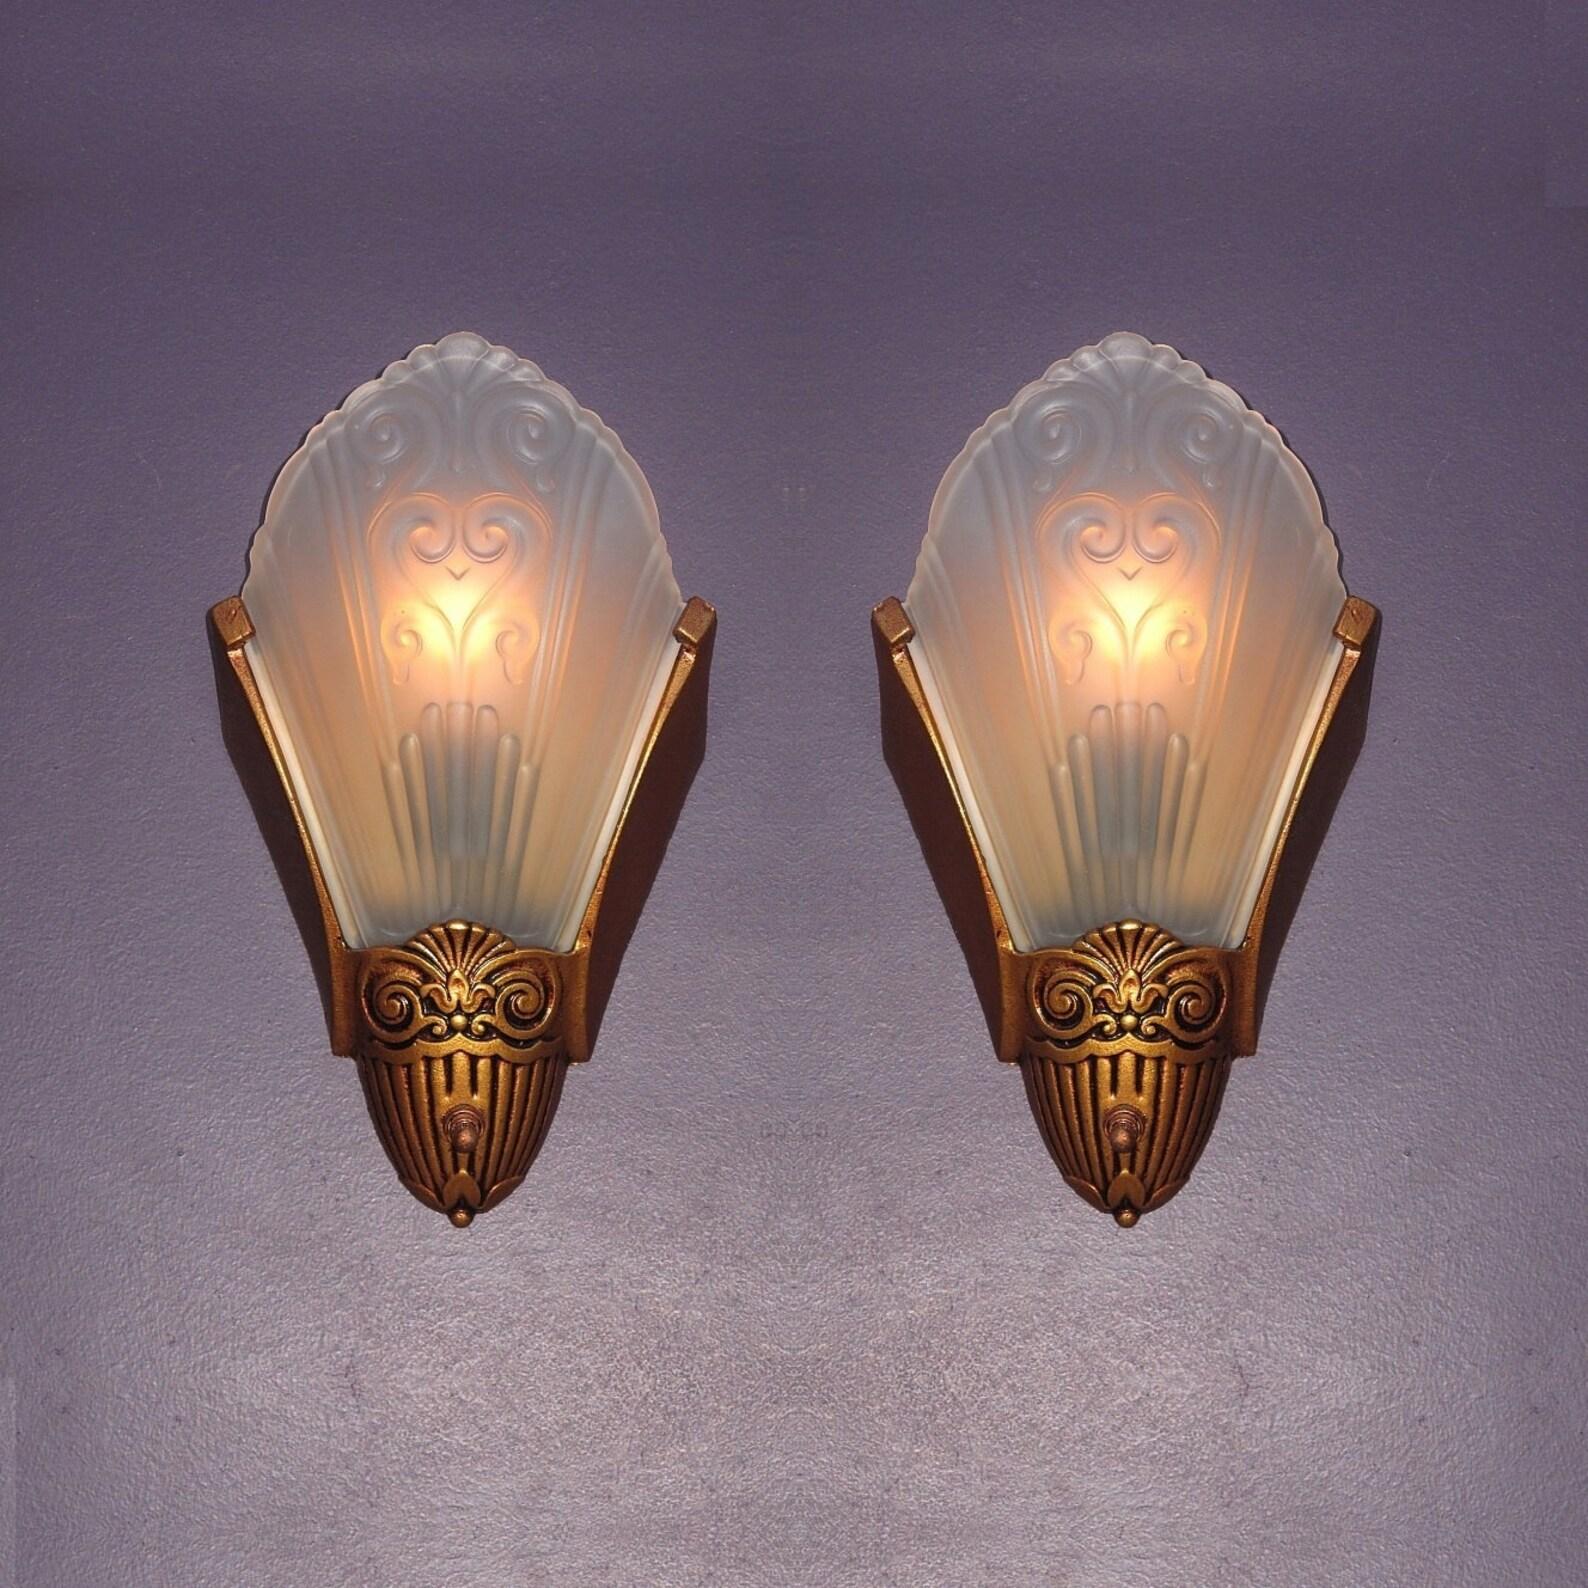 Simple yet elegant vintage slip shade wall sconces by Virden of Milwaukee. Dates to late 1920s through the 30s, the Art Deco period of American design.
Solid cast iron back with clear frosted shades and the fixture is refinished in an original